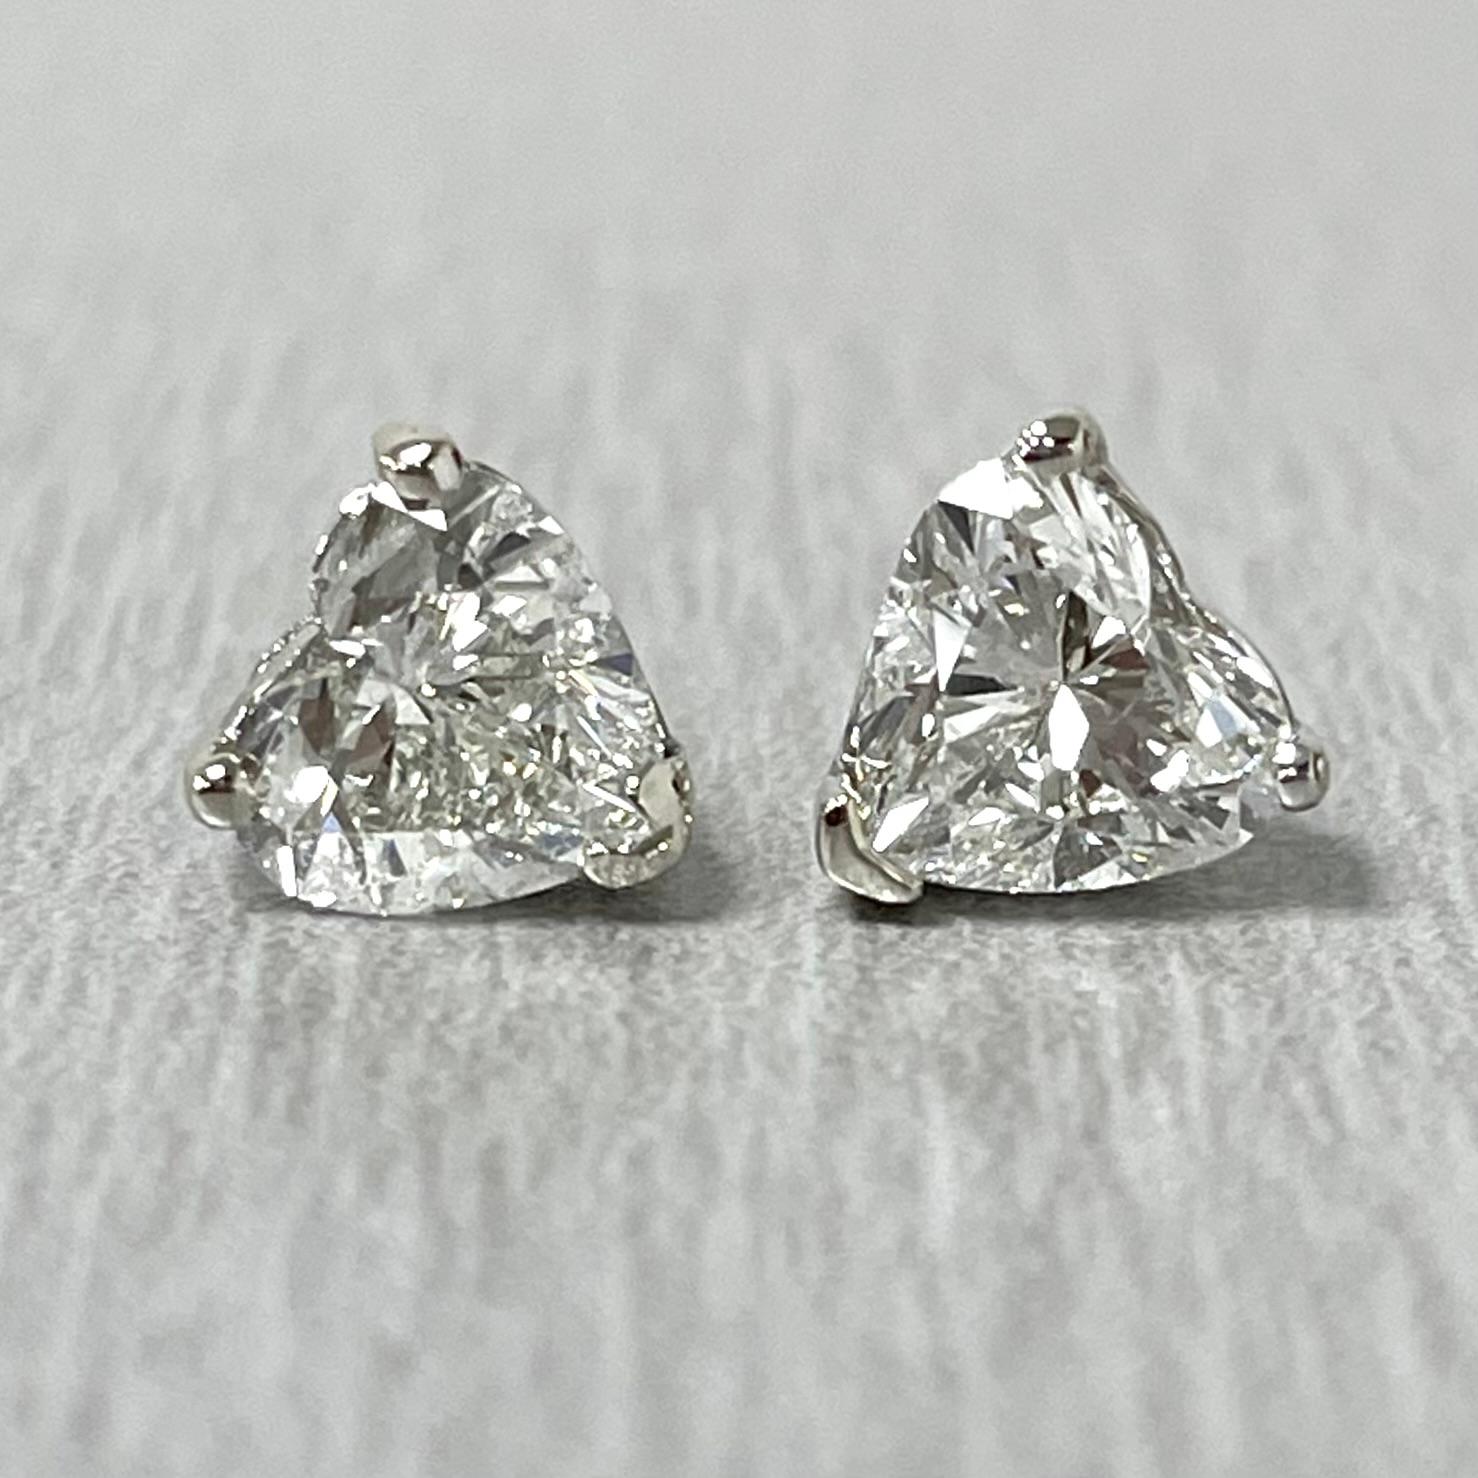 Diamond solitaire studs are a signature everyday piece of jewelry. They are a classic and a statement simultaneously. 

This particular pair of Heart Shape Studs features a depth of 56.8% and 58.4% enabling it to look more like a pair of 1.15 ct